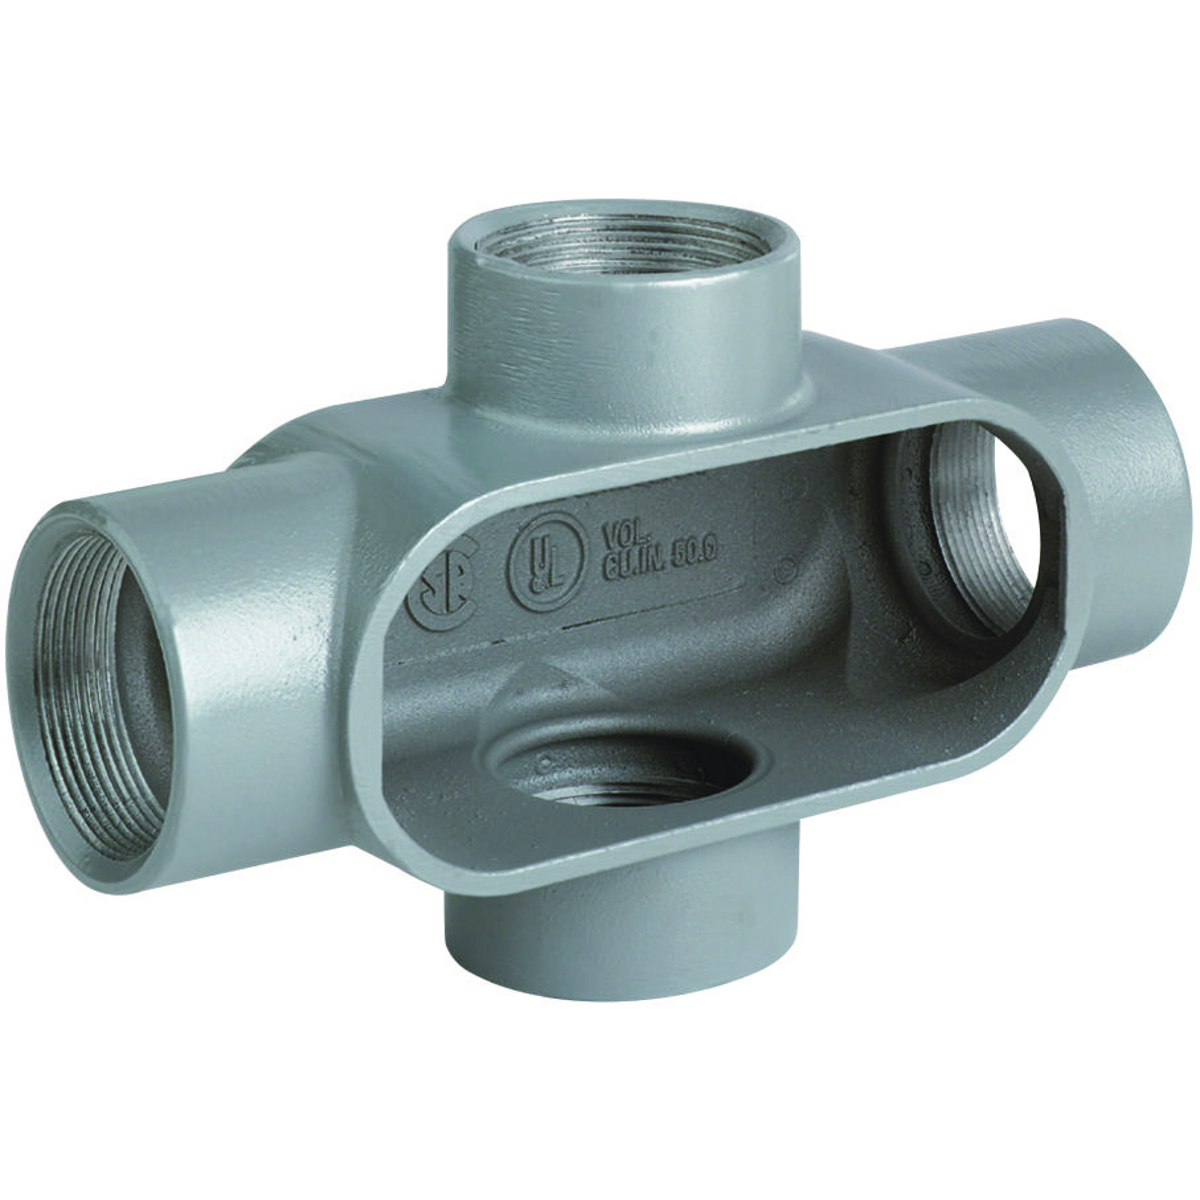 DURALOY 7 SERIES - ALUMINUM CONDUIT BODY - X TYPE - HUB SIZE 3/4 INCH -VOLUME 9.5 CUBIC INCHES